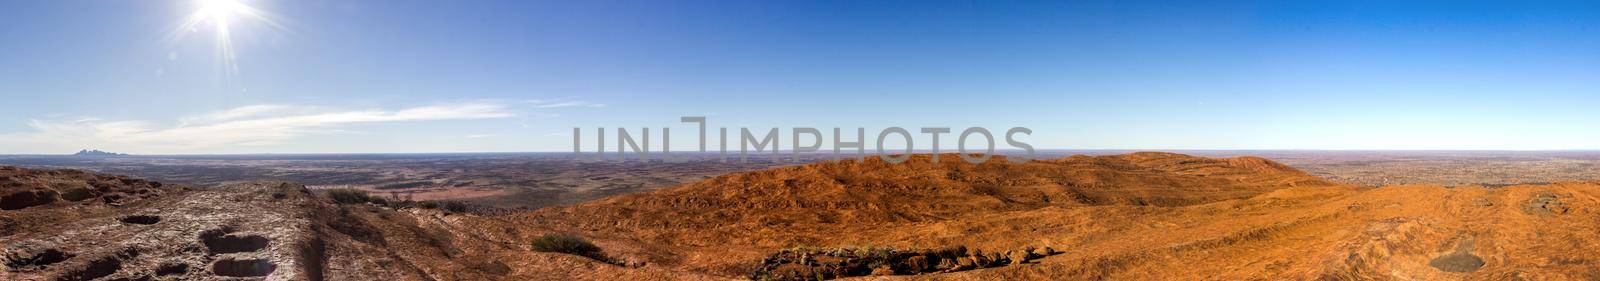 panorama view from the uluru after hiking up the Uluru with kata tjuta in the distance, ayers Rock, the Red Center of Australia, Australia by bettercallcurry